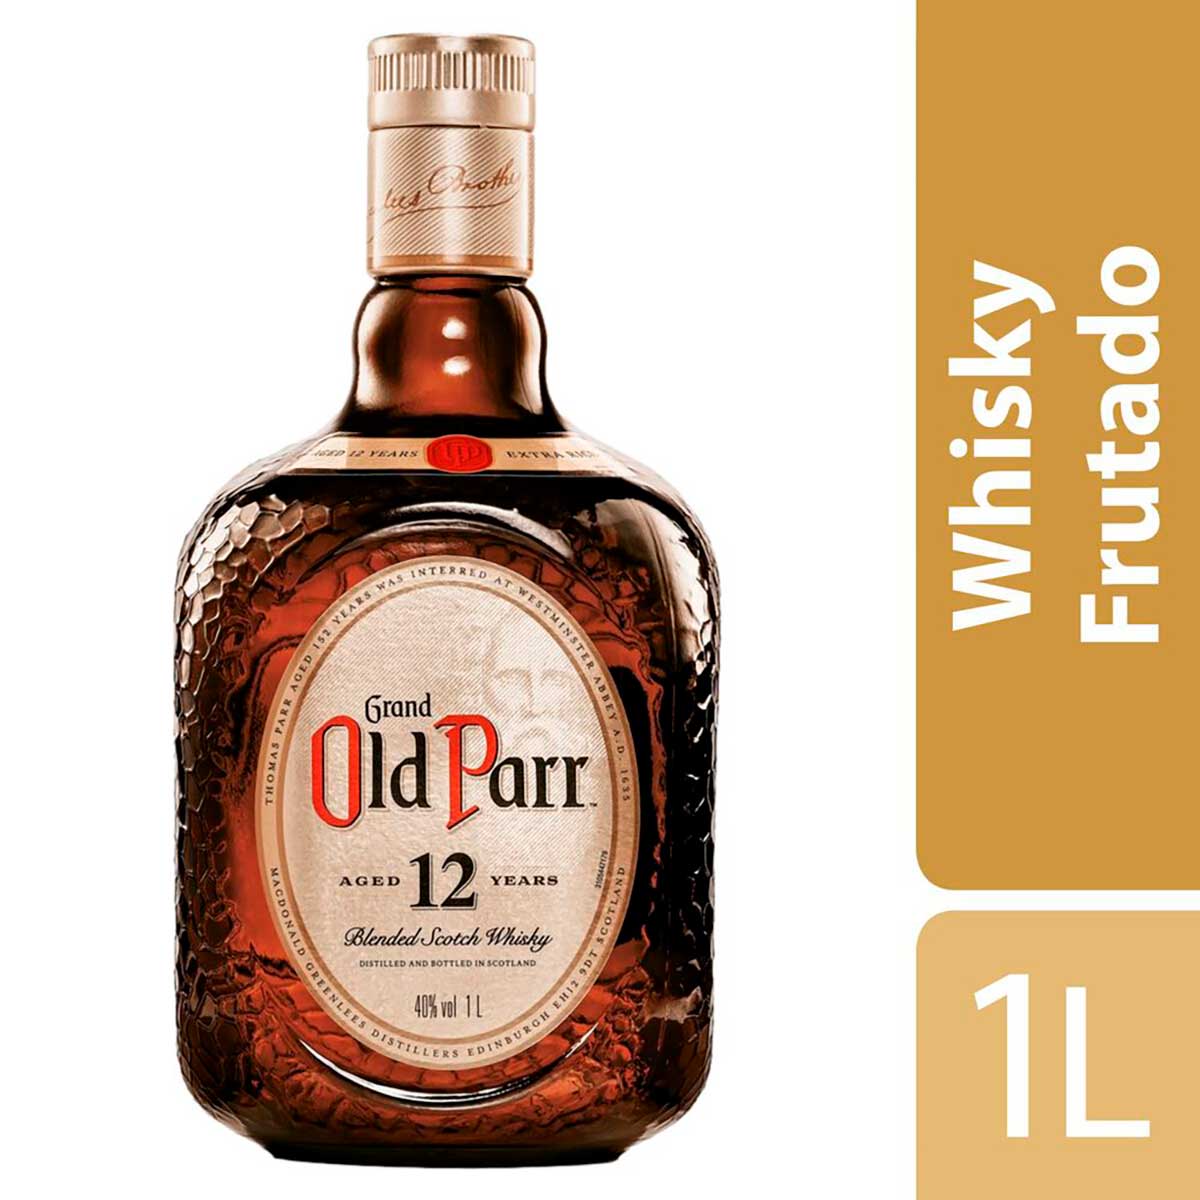 whisky-old-parr-1l---energetico-red-bull-energy-drink-250ml-pack-com-6-unidades-3.jpg